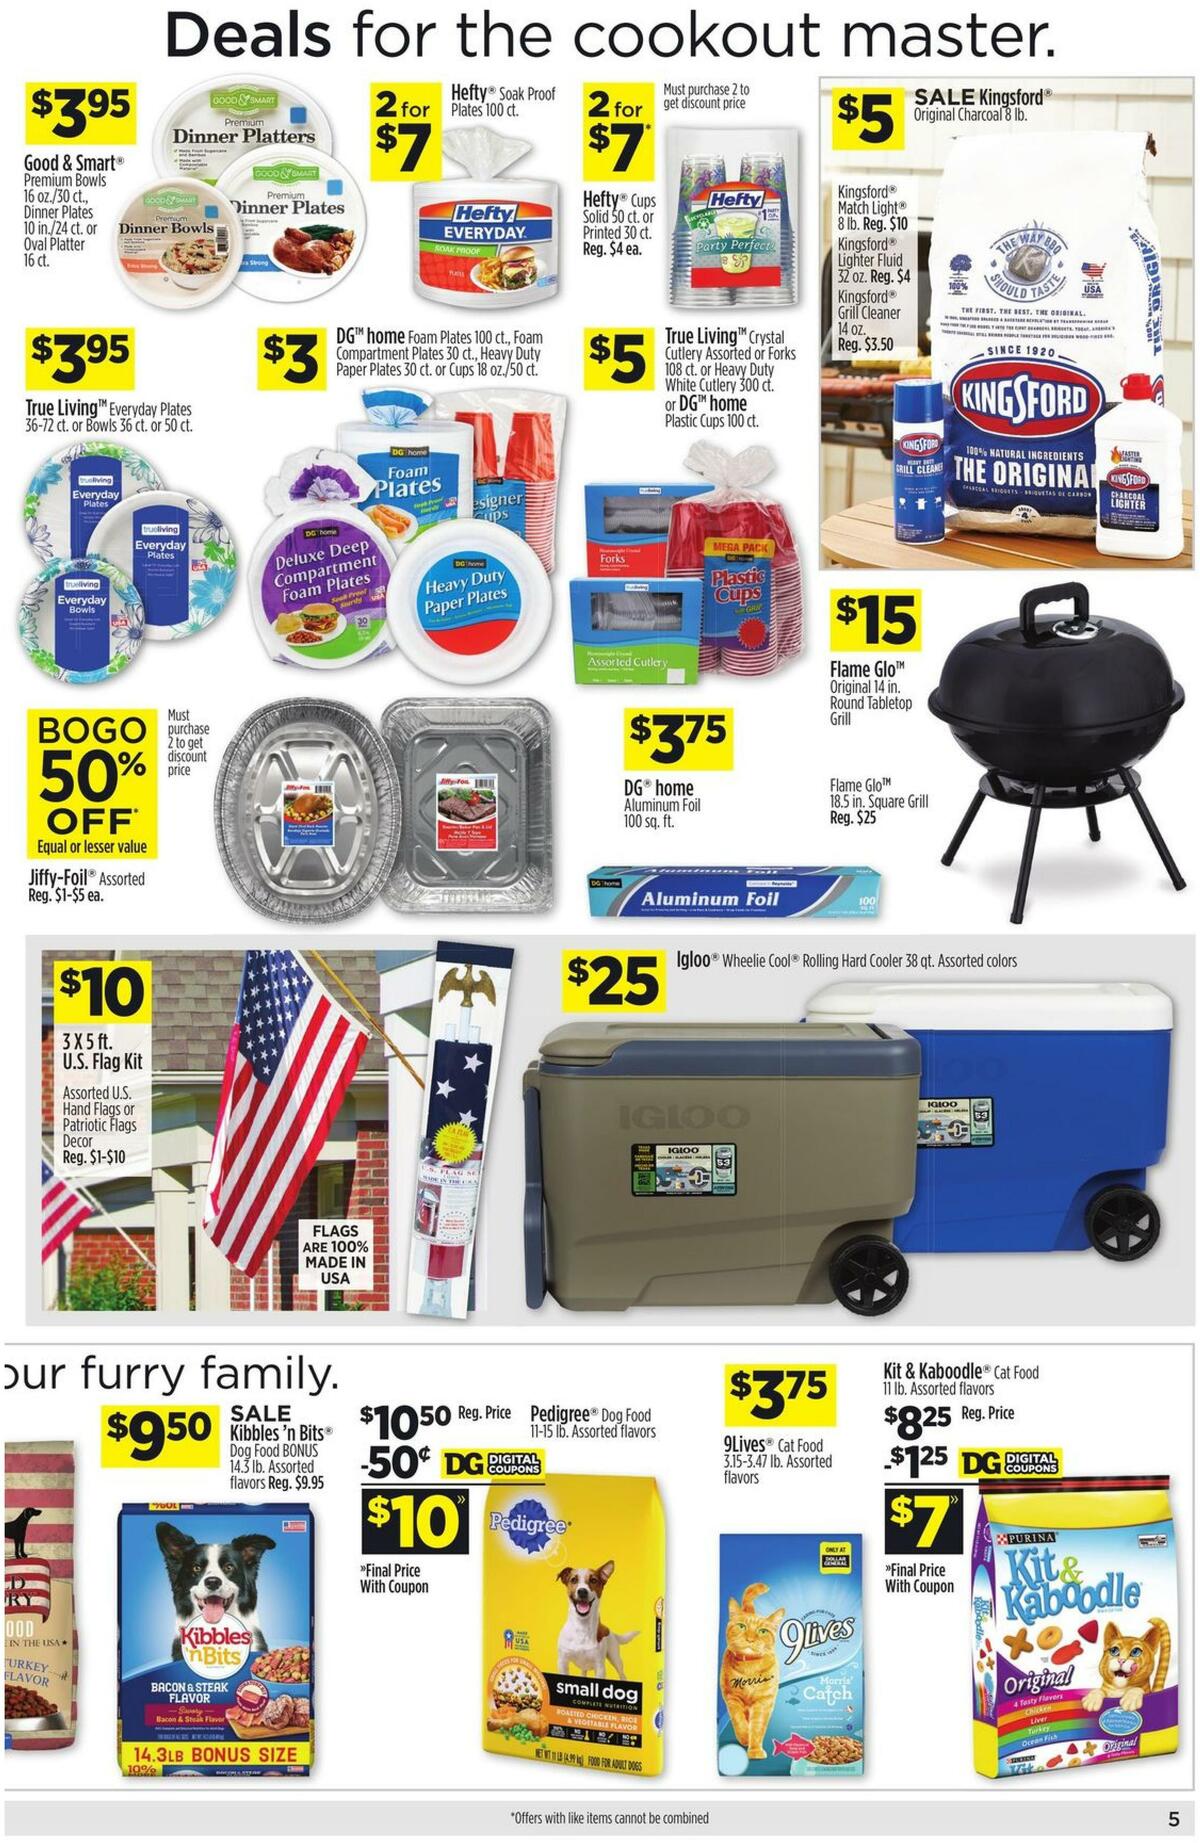 Dollar General Weekly Ad from May 30